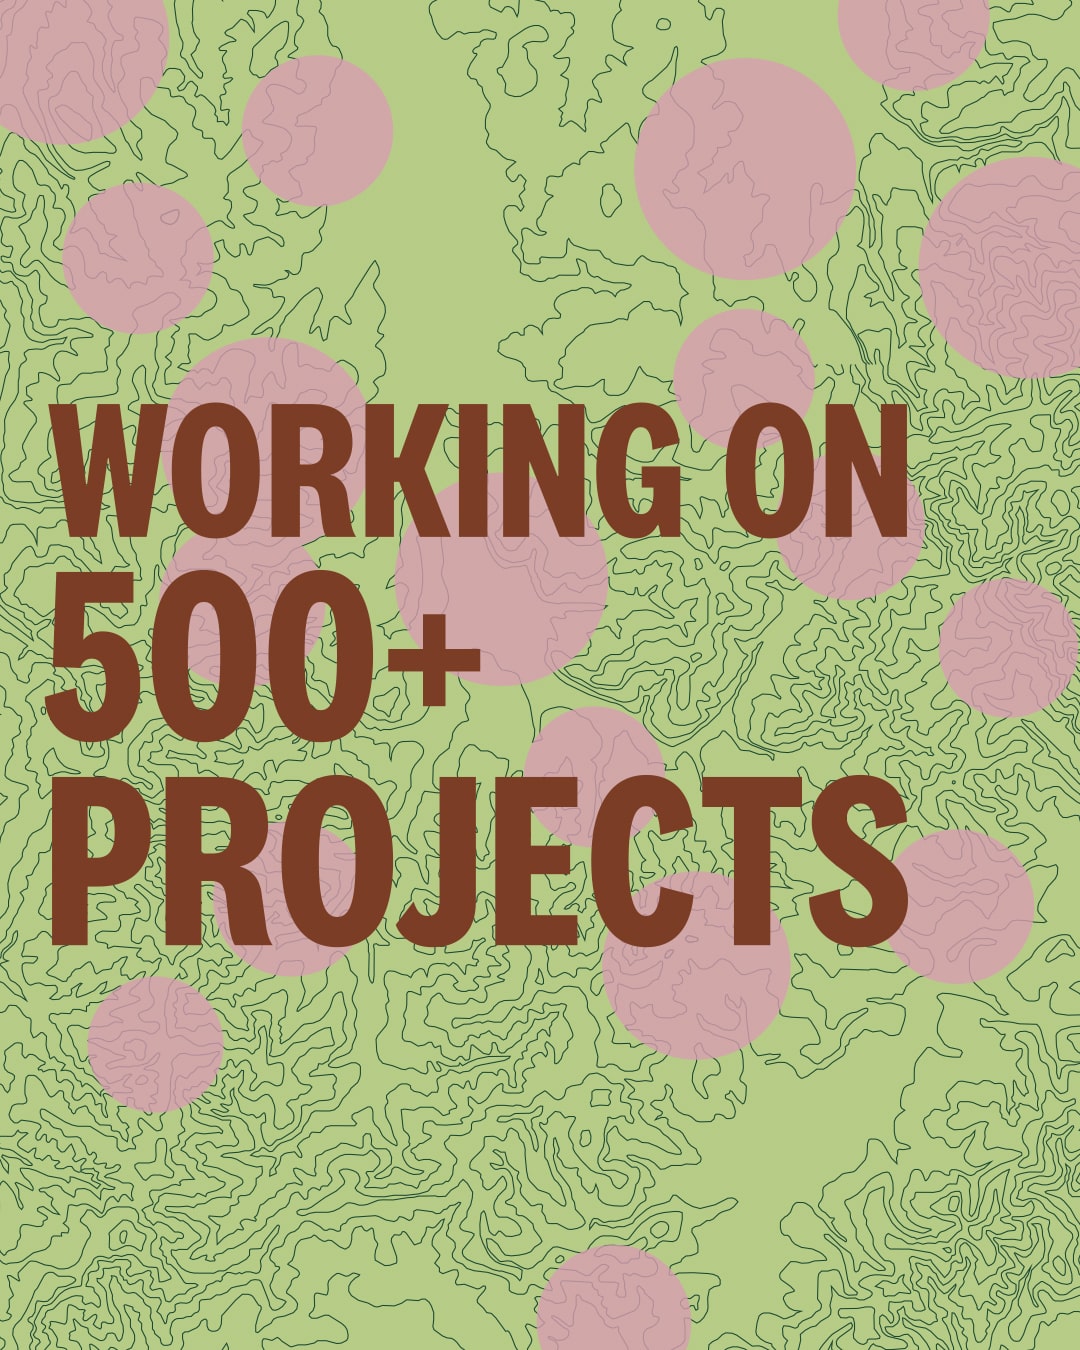 Auckland Council are working on 500+ projects to deliver on climate action right now